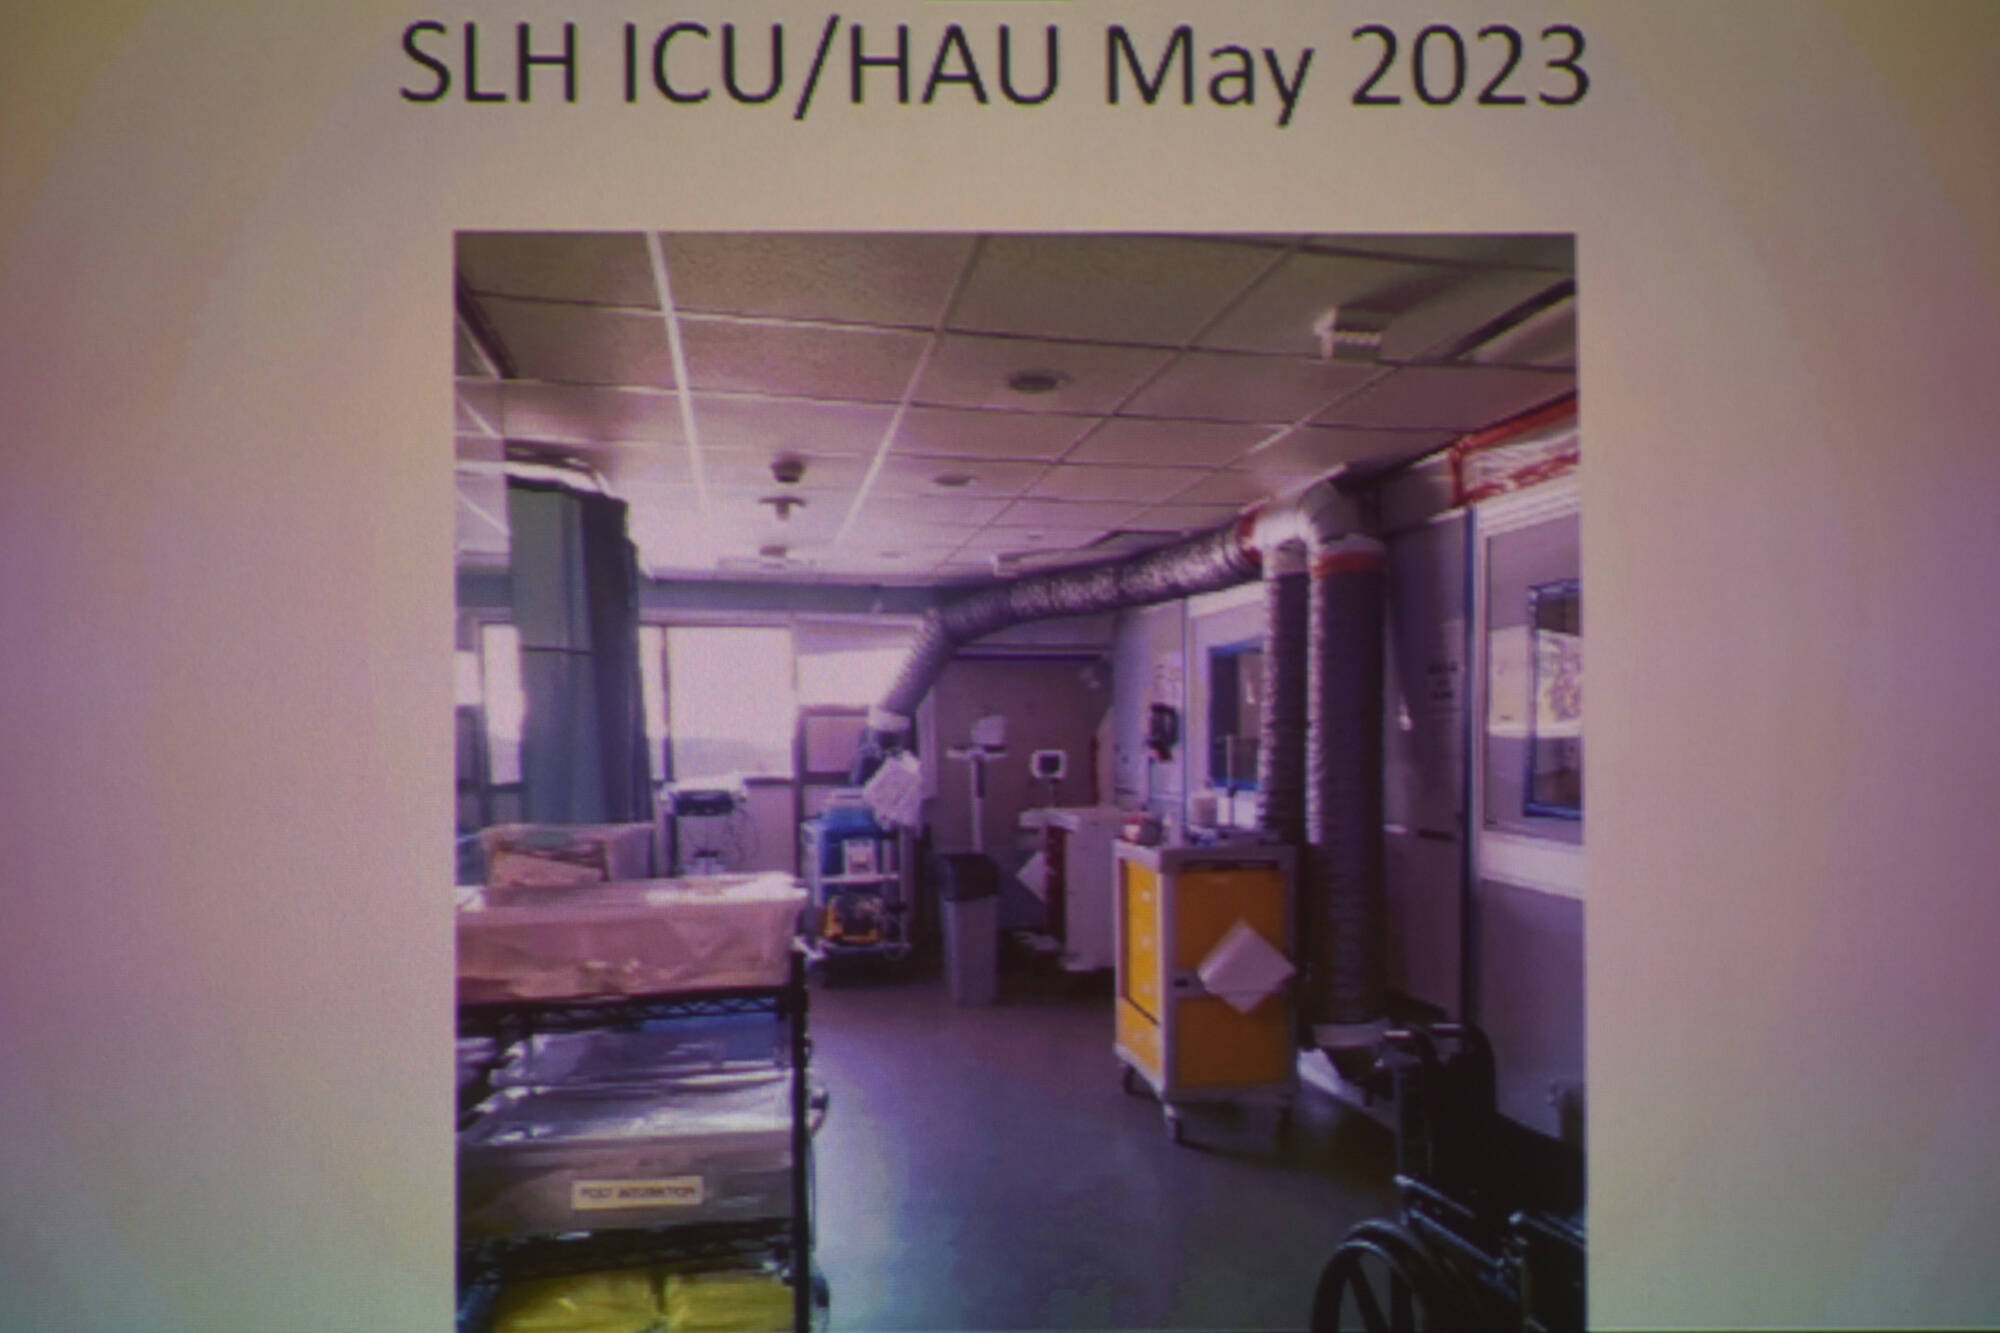 Dr. Scott McKee included a photo of the crowded ICU, intensive care unit, also called the HAU, high acuity unit, in Shuswap Lake General Hospital in May 2023 during his presentation to Salmon Arm council on May 23. (Martha Wickett-Salmon Arm Observer)